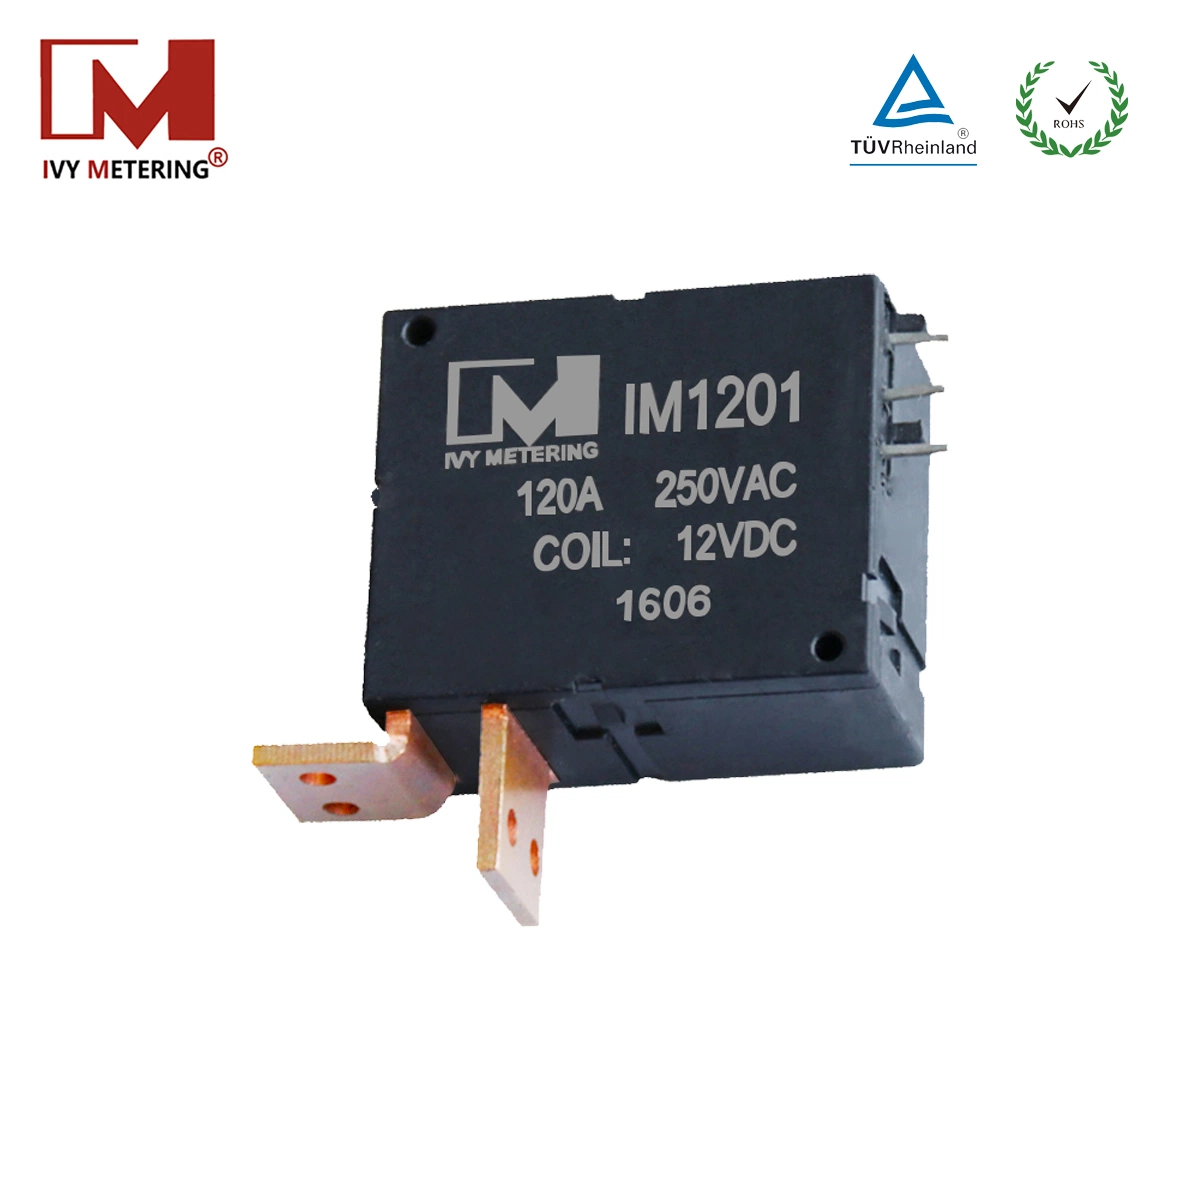 Protective General Purpose UC3 Certificate 120A High Power Relay